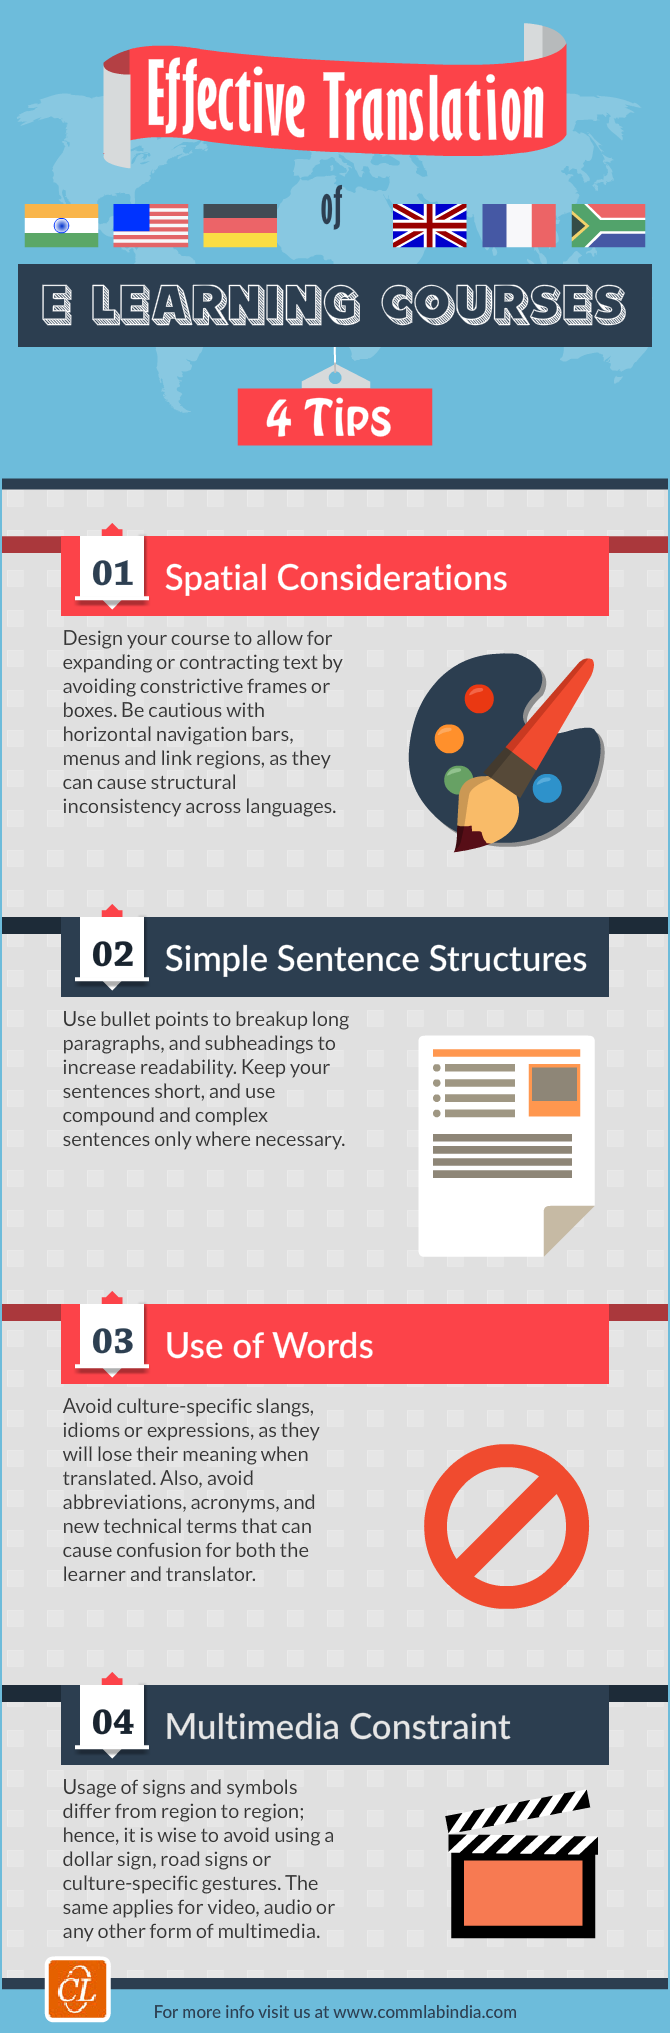 Effective Translation of E-learning Courses - 4 Tips [Infographic]